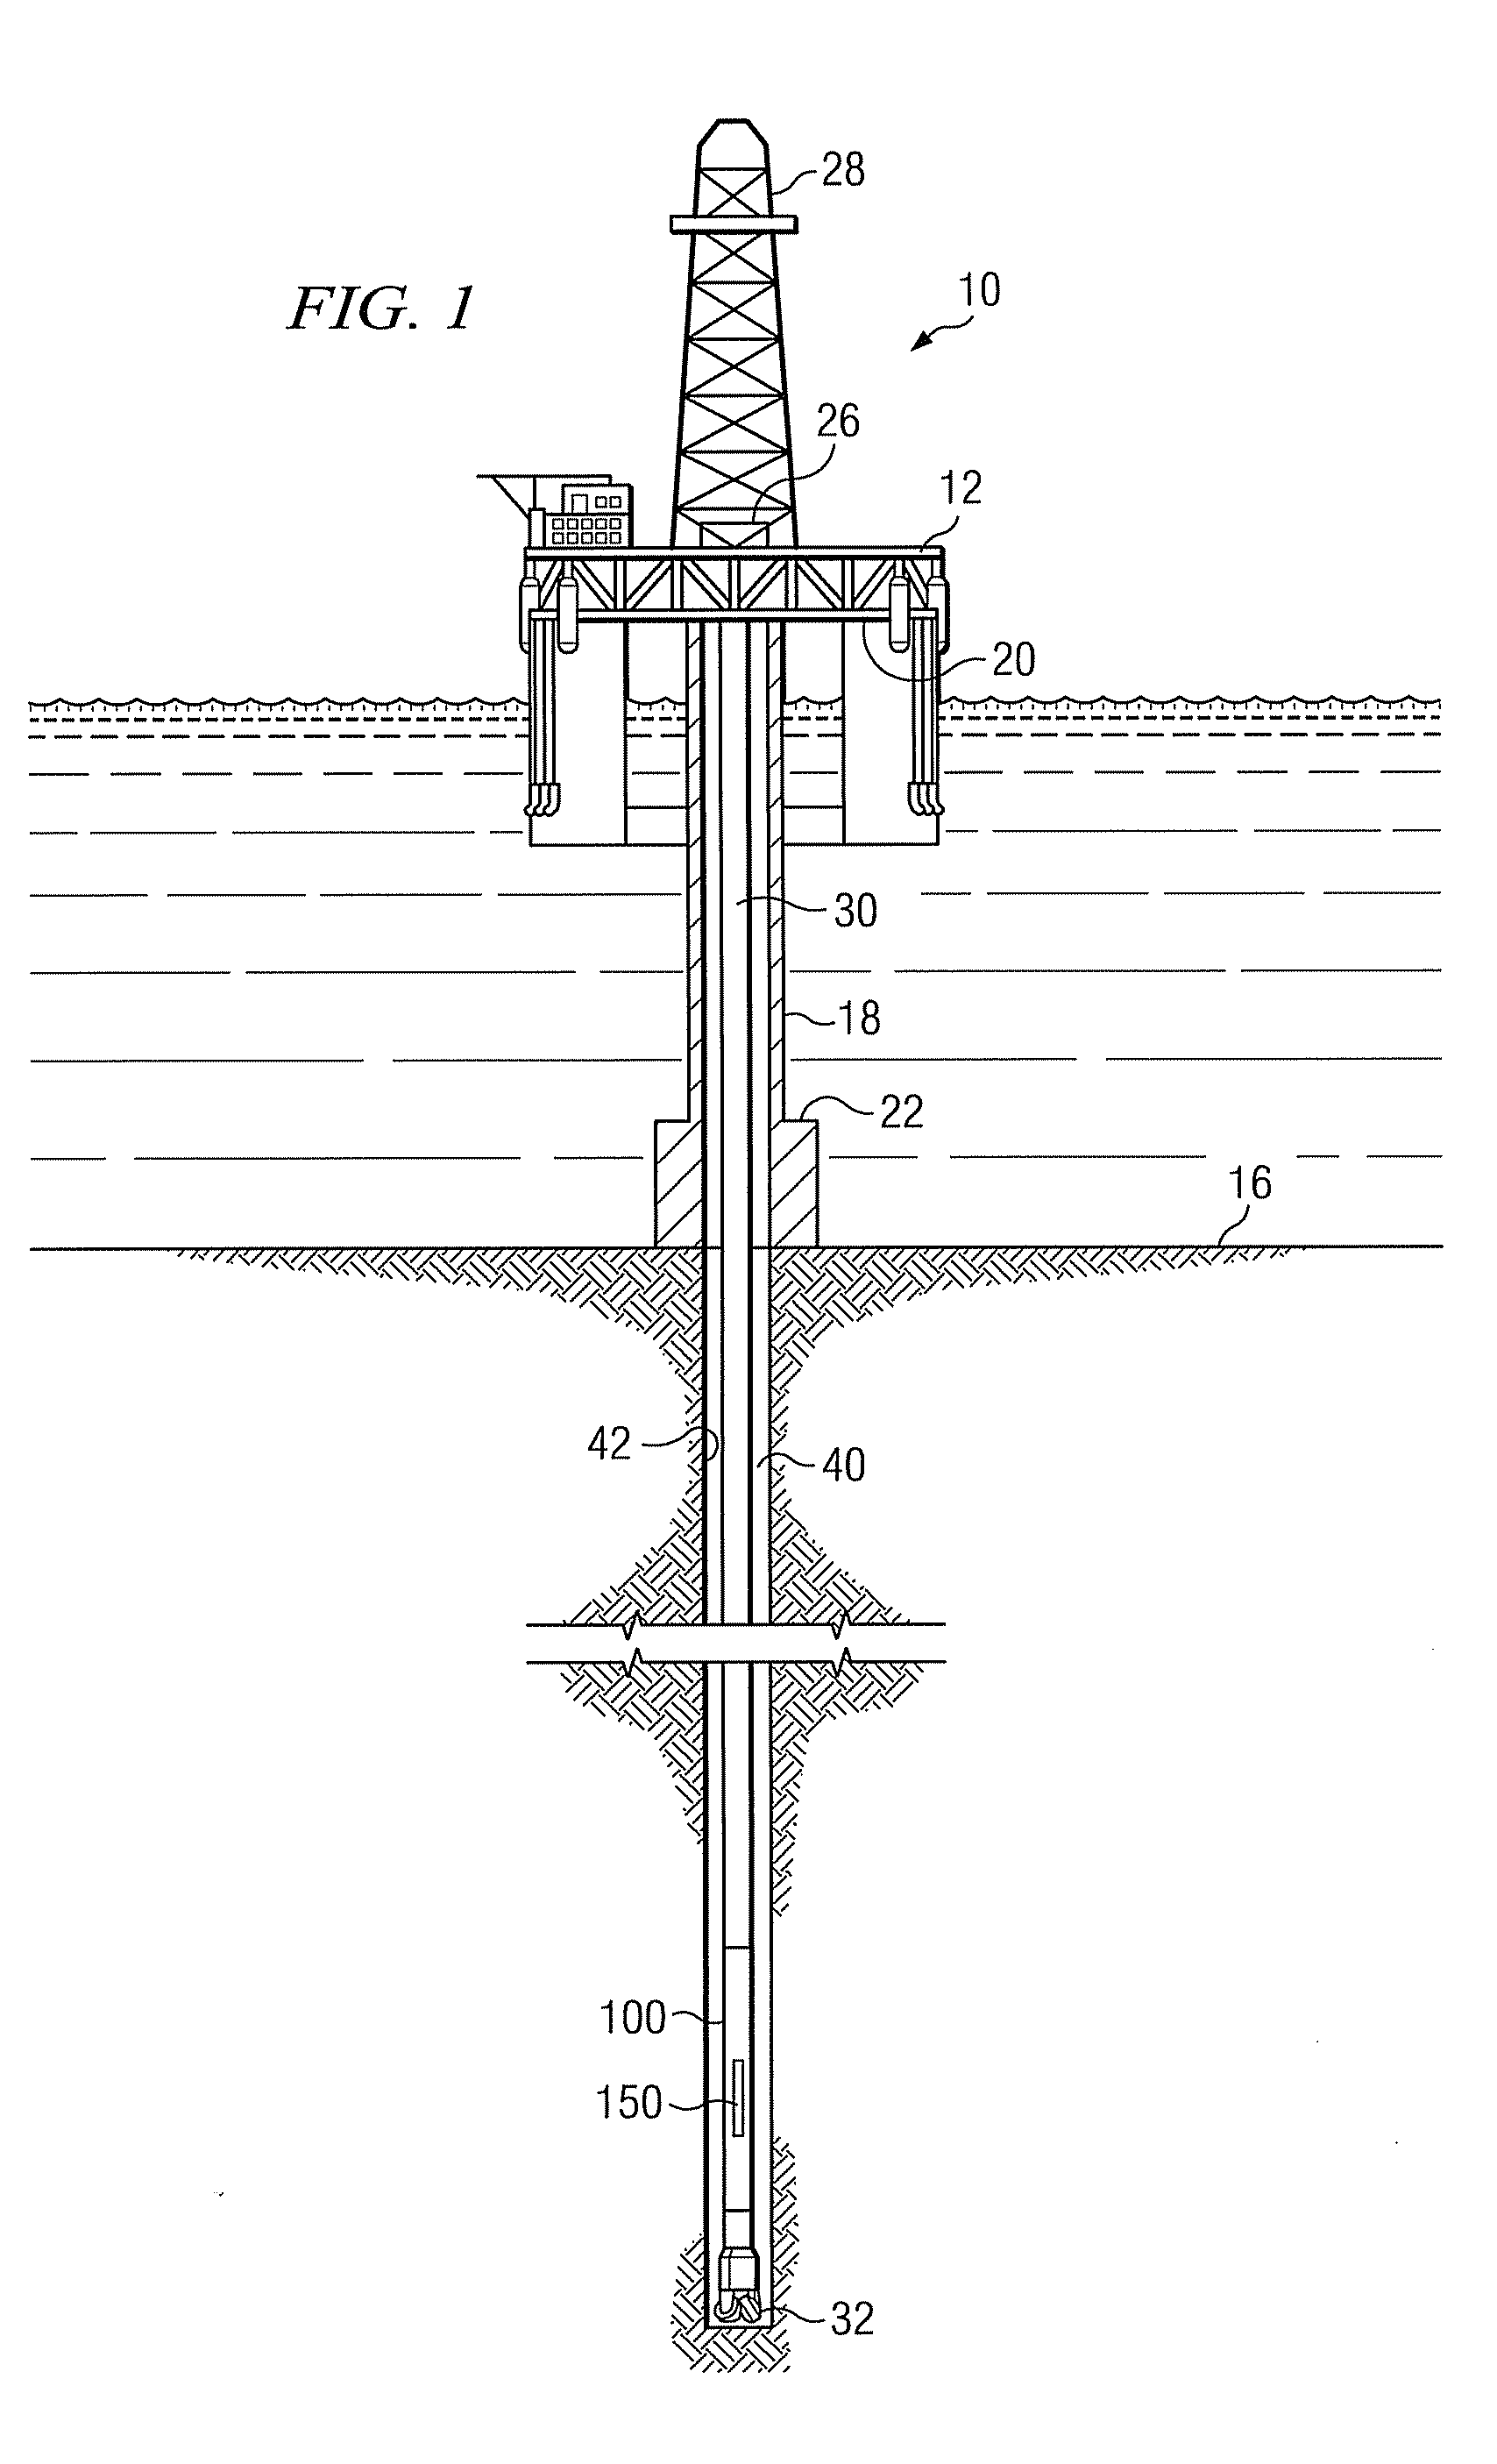 Apparatus for electrical power and/or data transfer between rotating components in a drill string